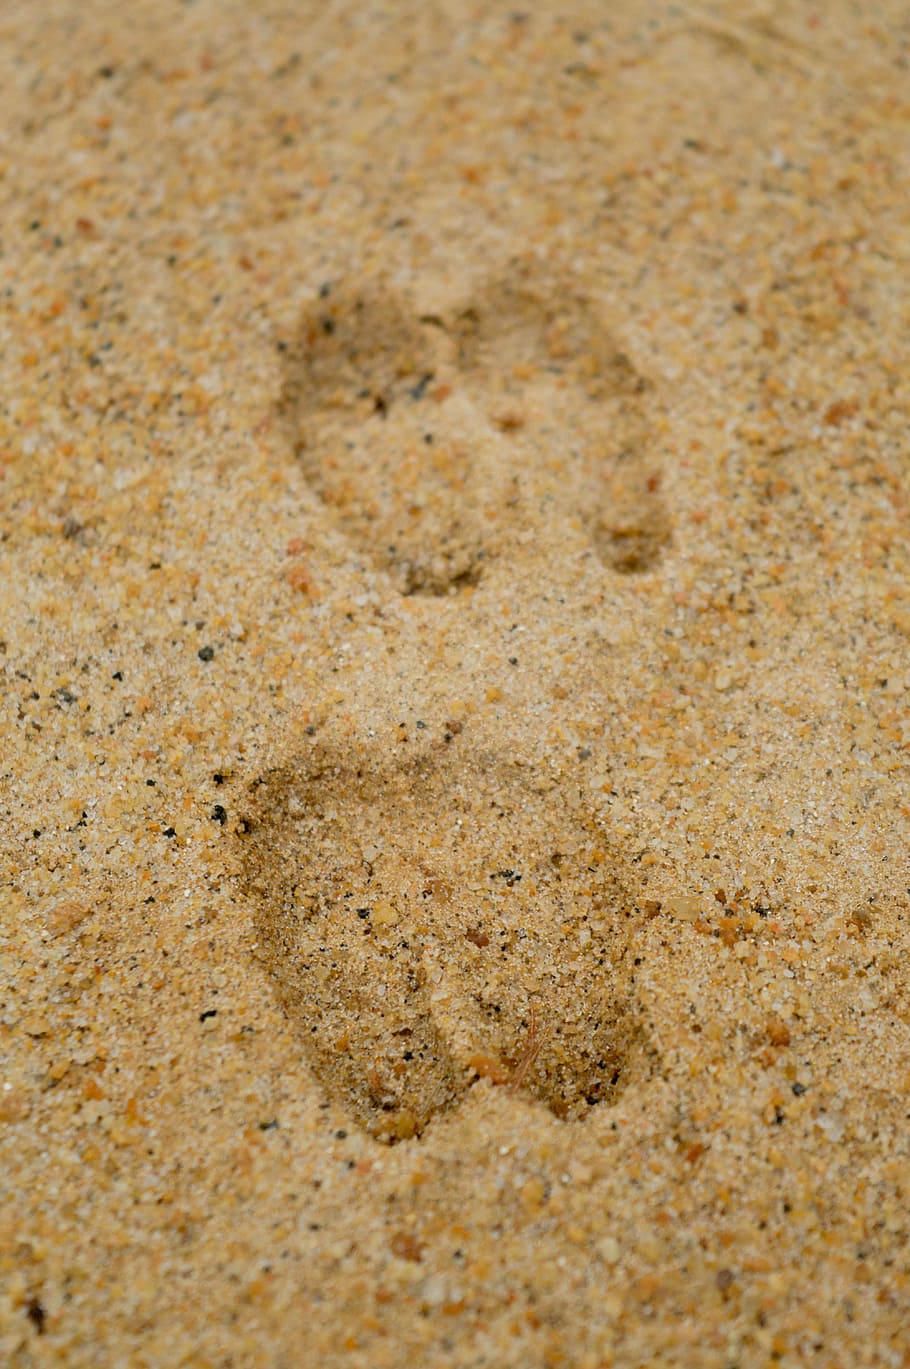 foot prints on sands, two paw prints in the sand, footprint, track